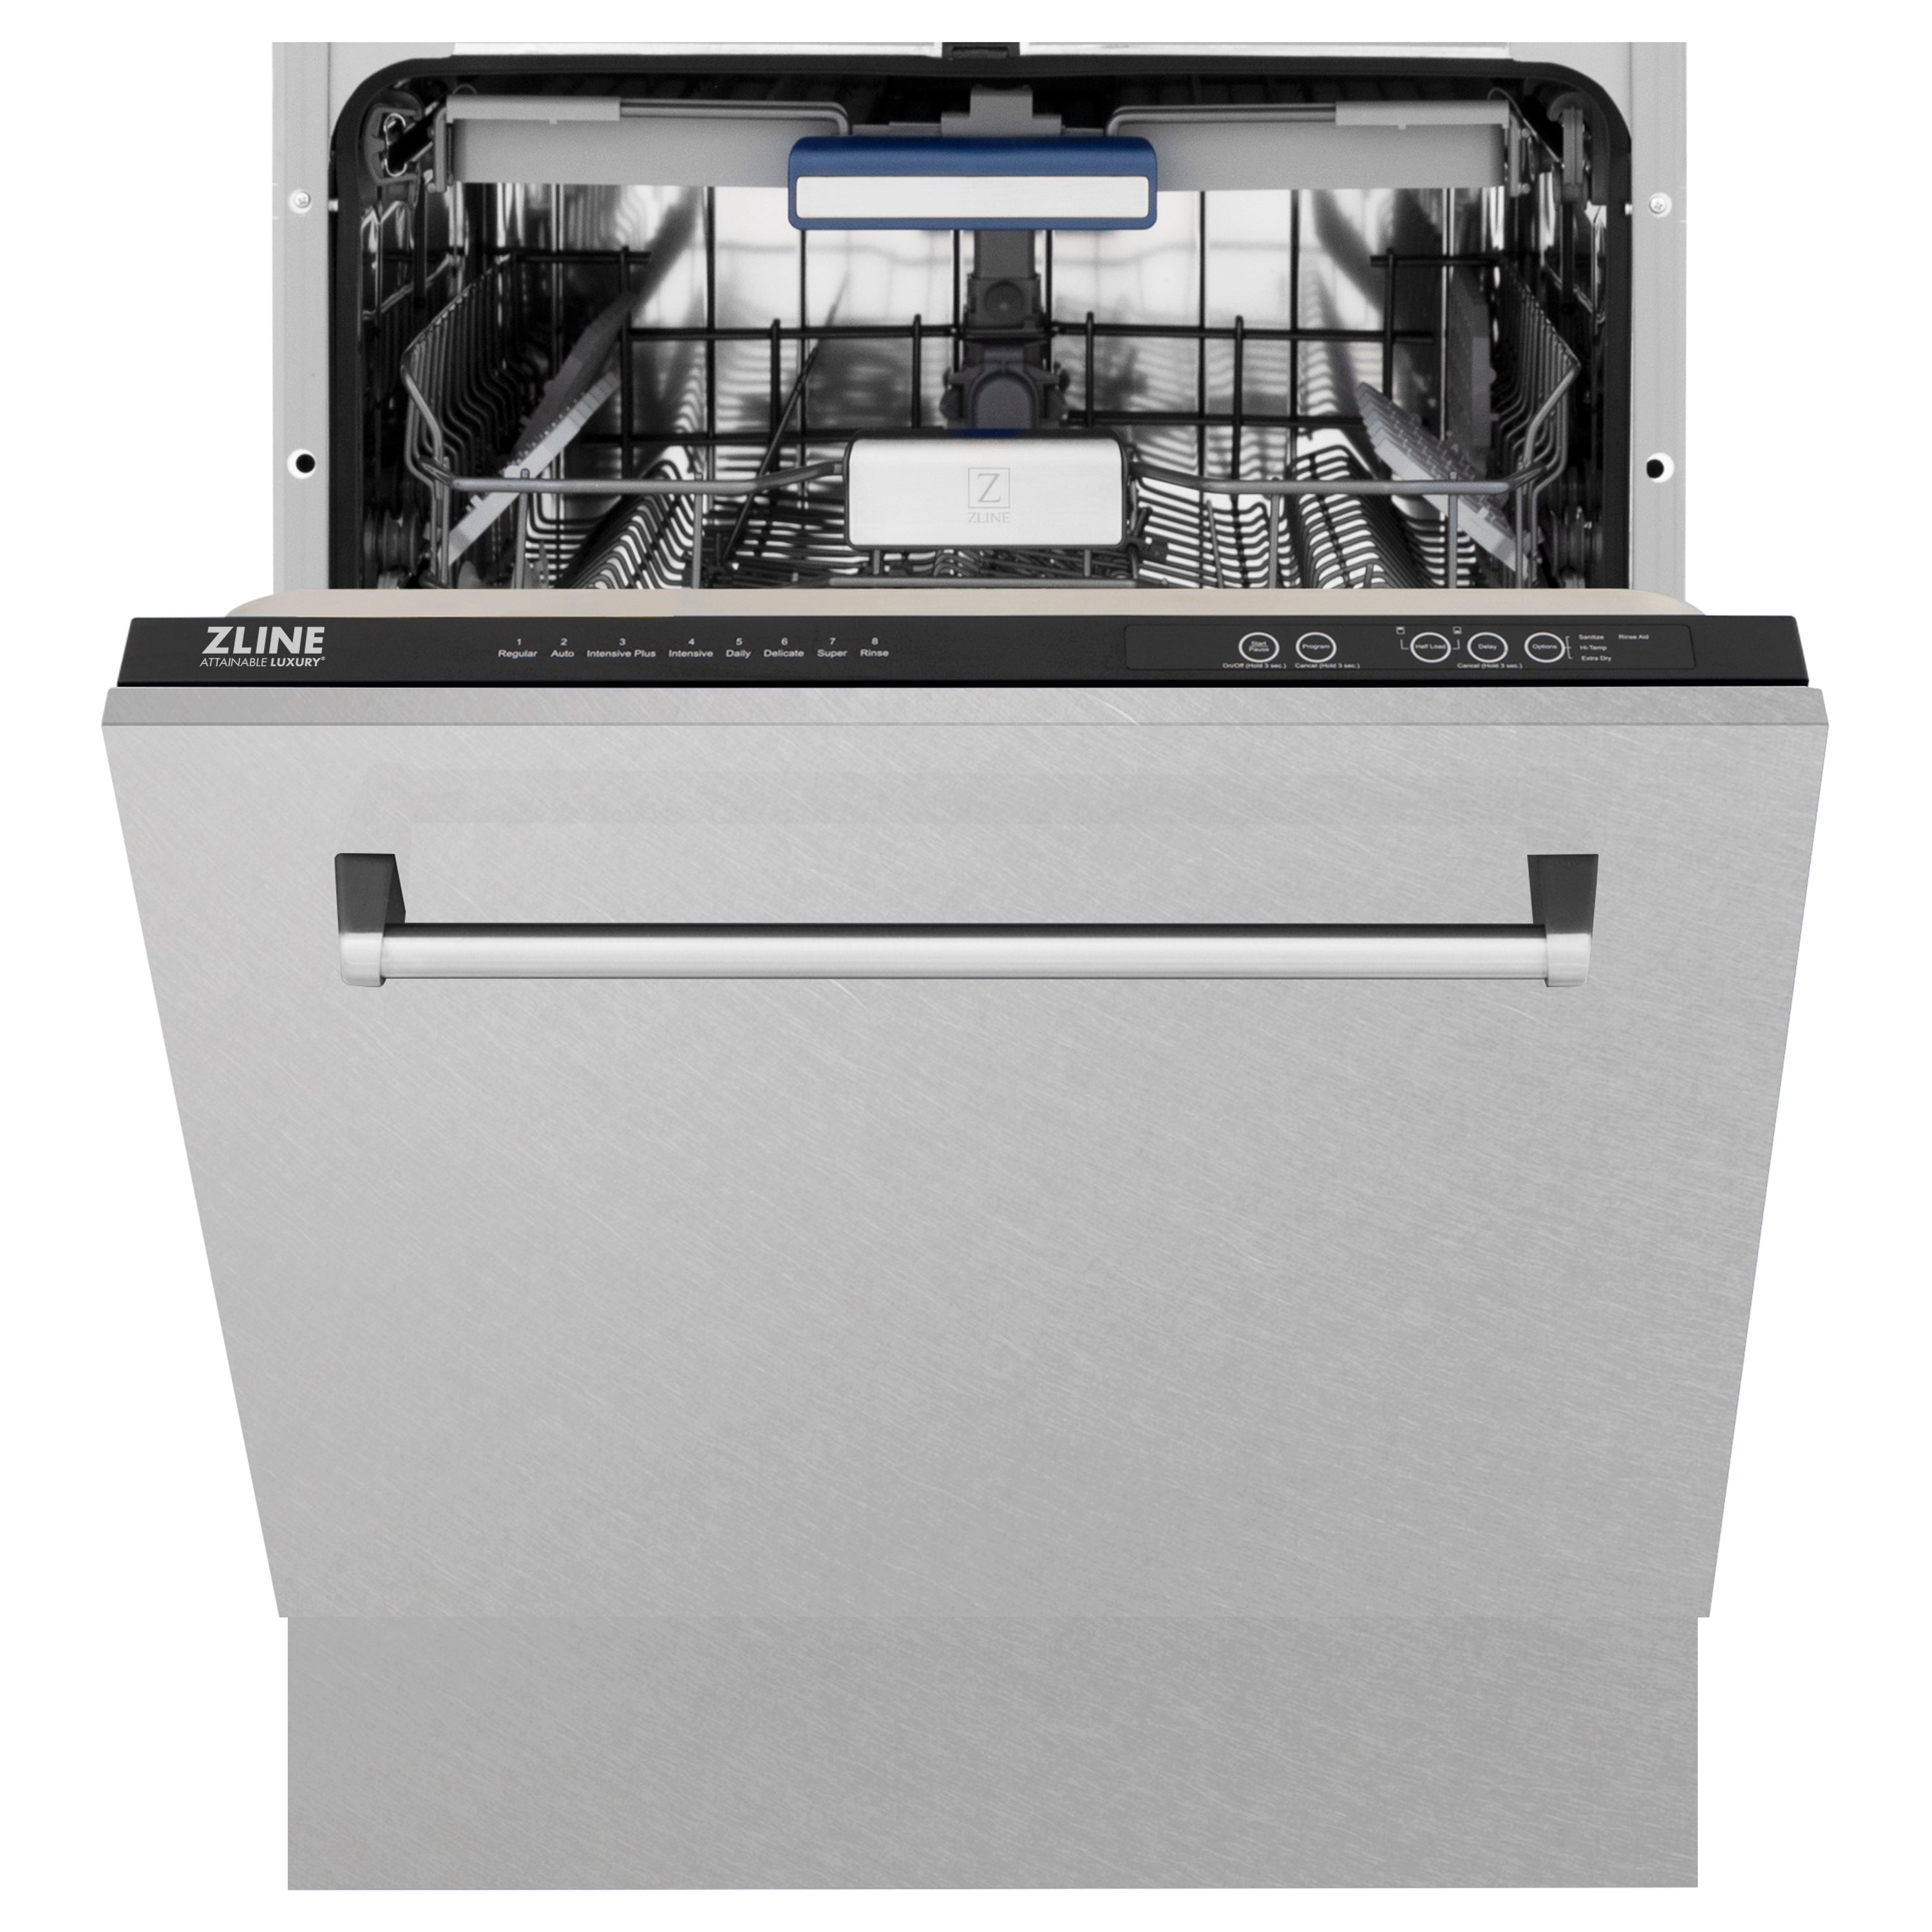 ZLINE 24" Tallac Series 3rd Rack Tall Tub Dishwasher in Fingerprint Resistant with Stainless Steel Tub, 51dBa (DWV-SN-24)